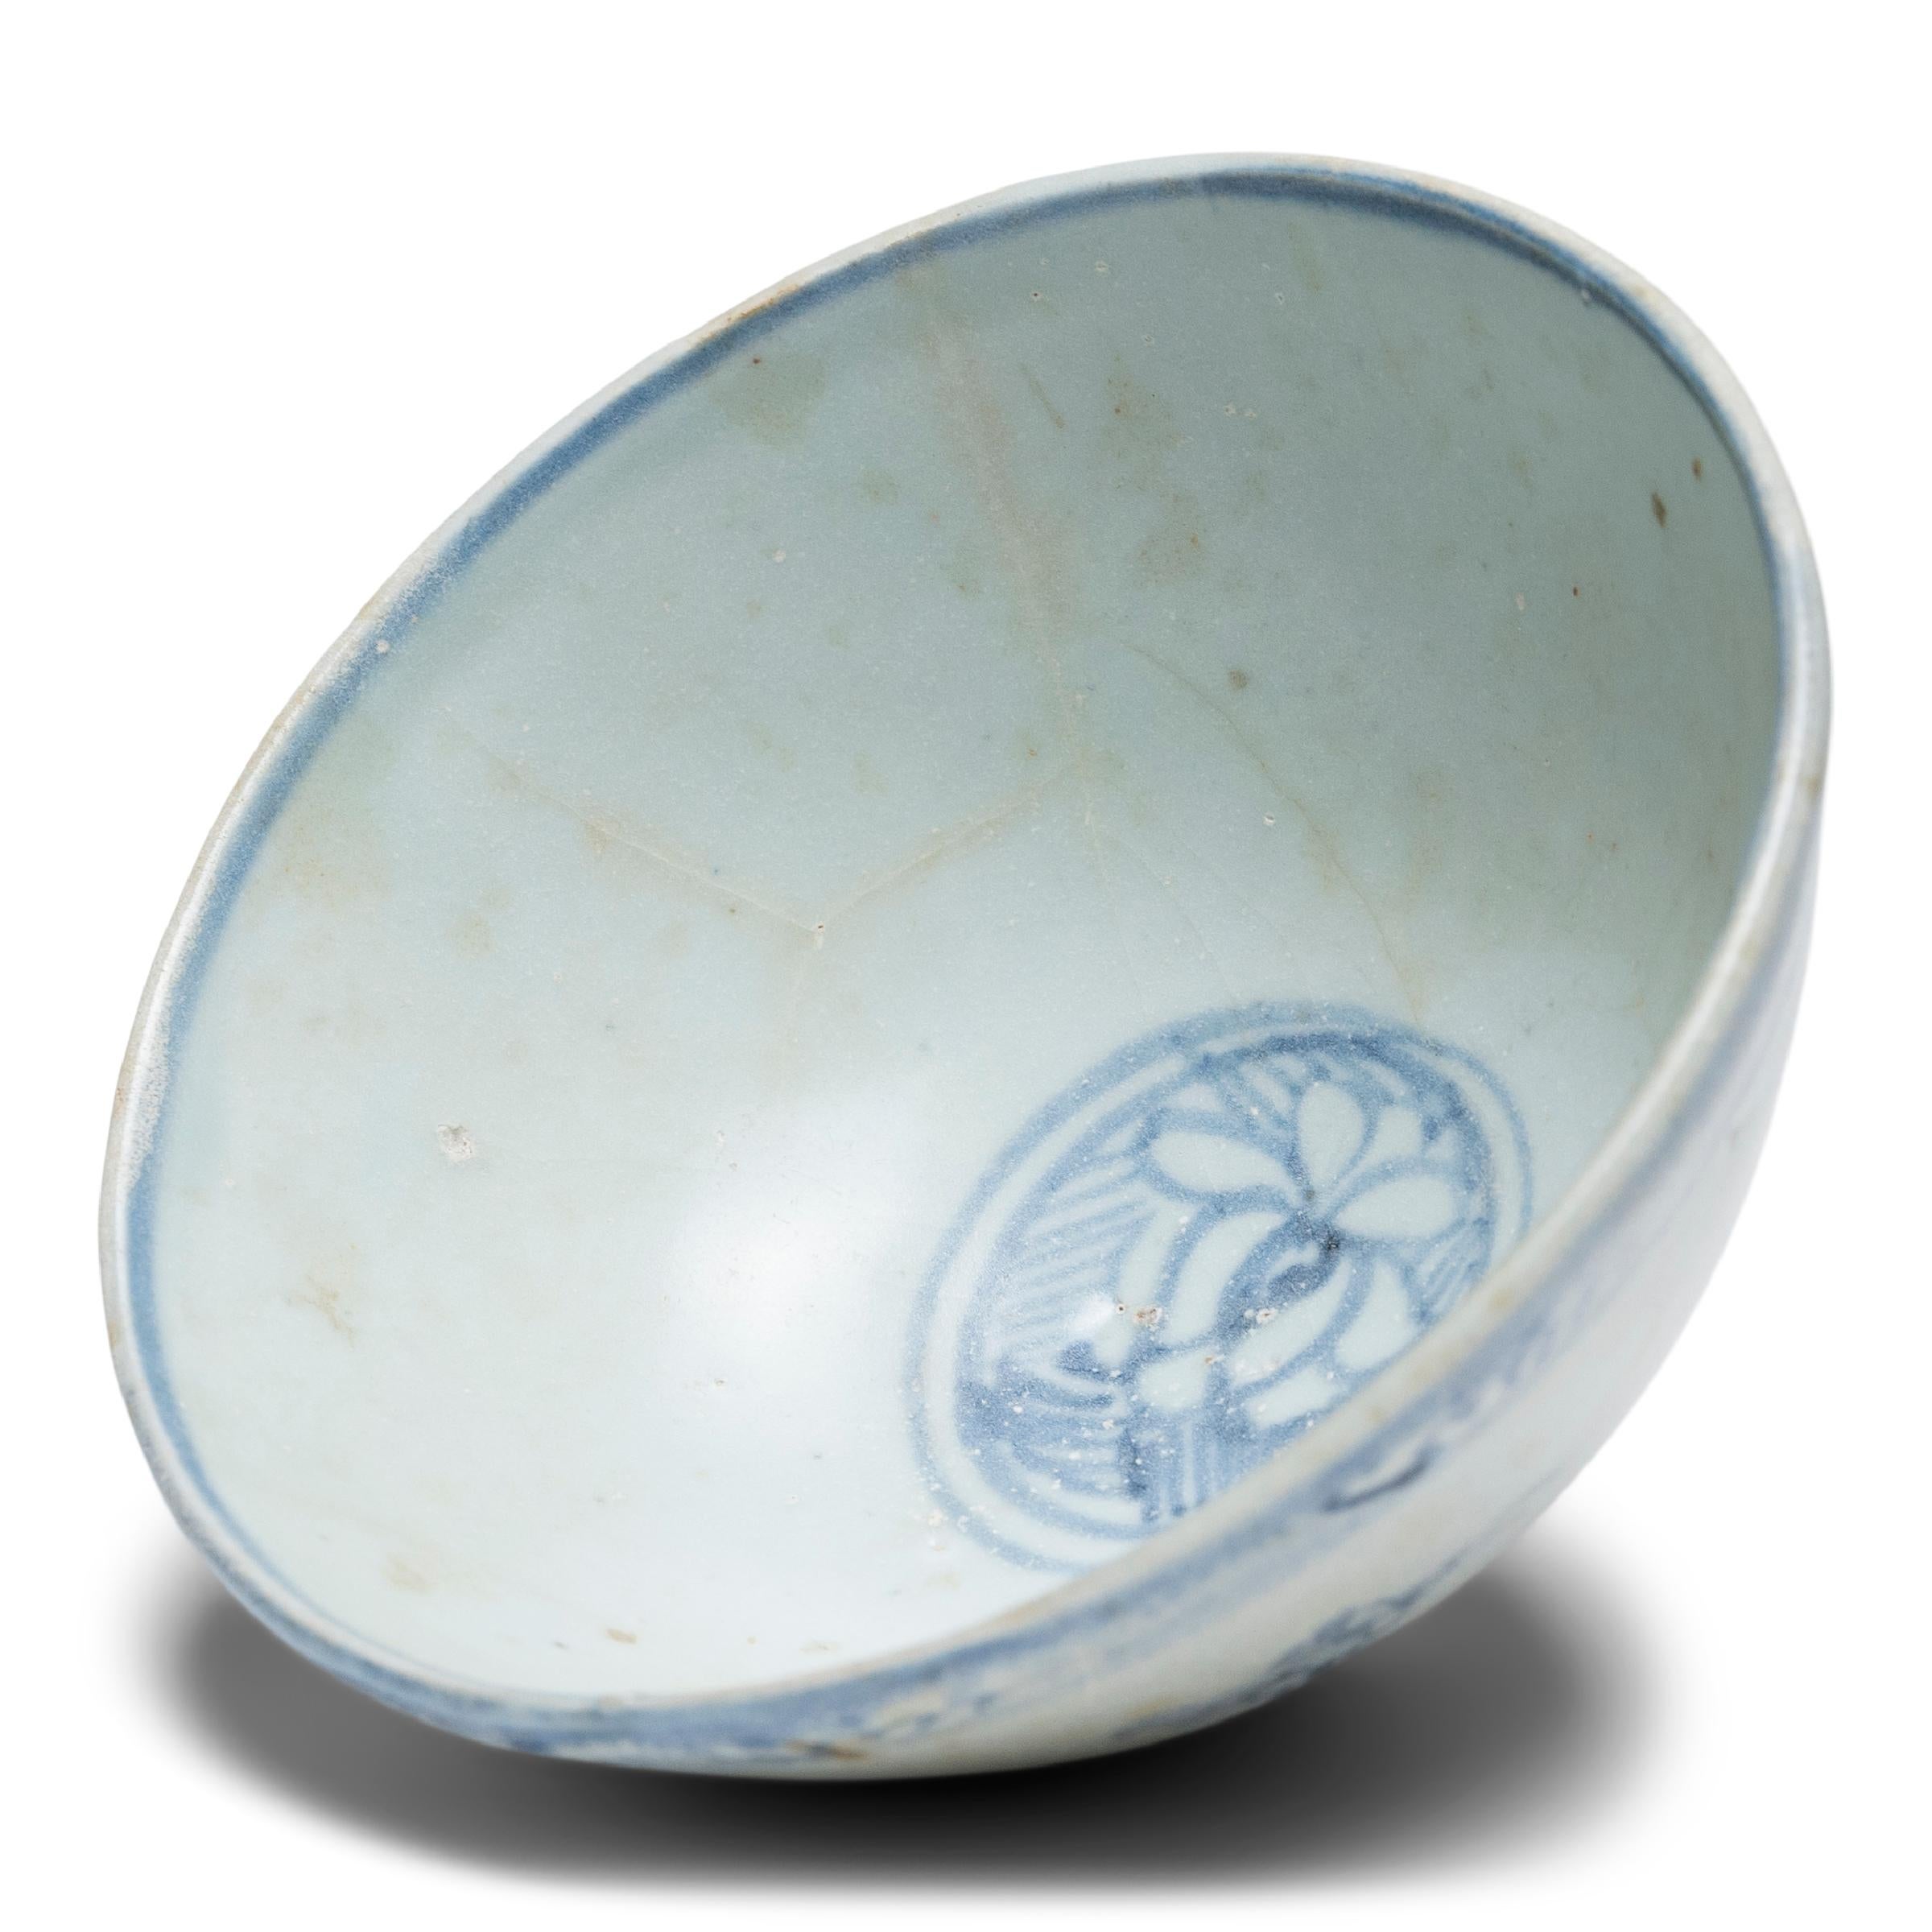 This refined porcelain rice bowl dates to the late Ming dynasty and is beautifully decorated in the blue-and-white style. Expressive sweeps of blue bring the bowl’s simple form to life, adorning its speckled grey-white underglaze with floral motifs